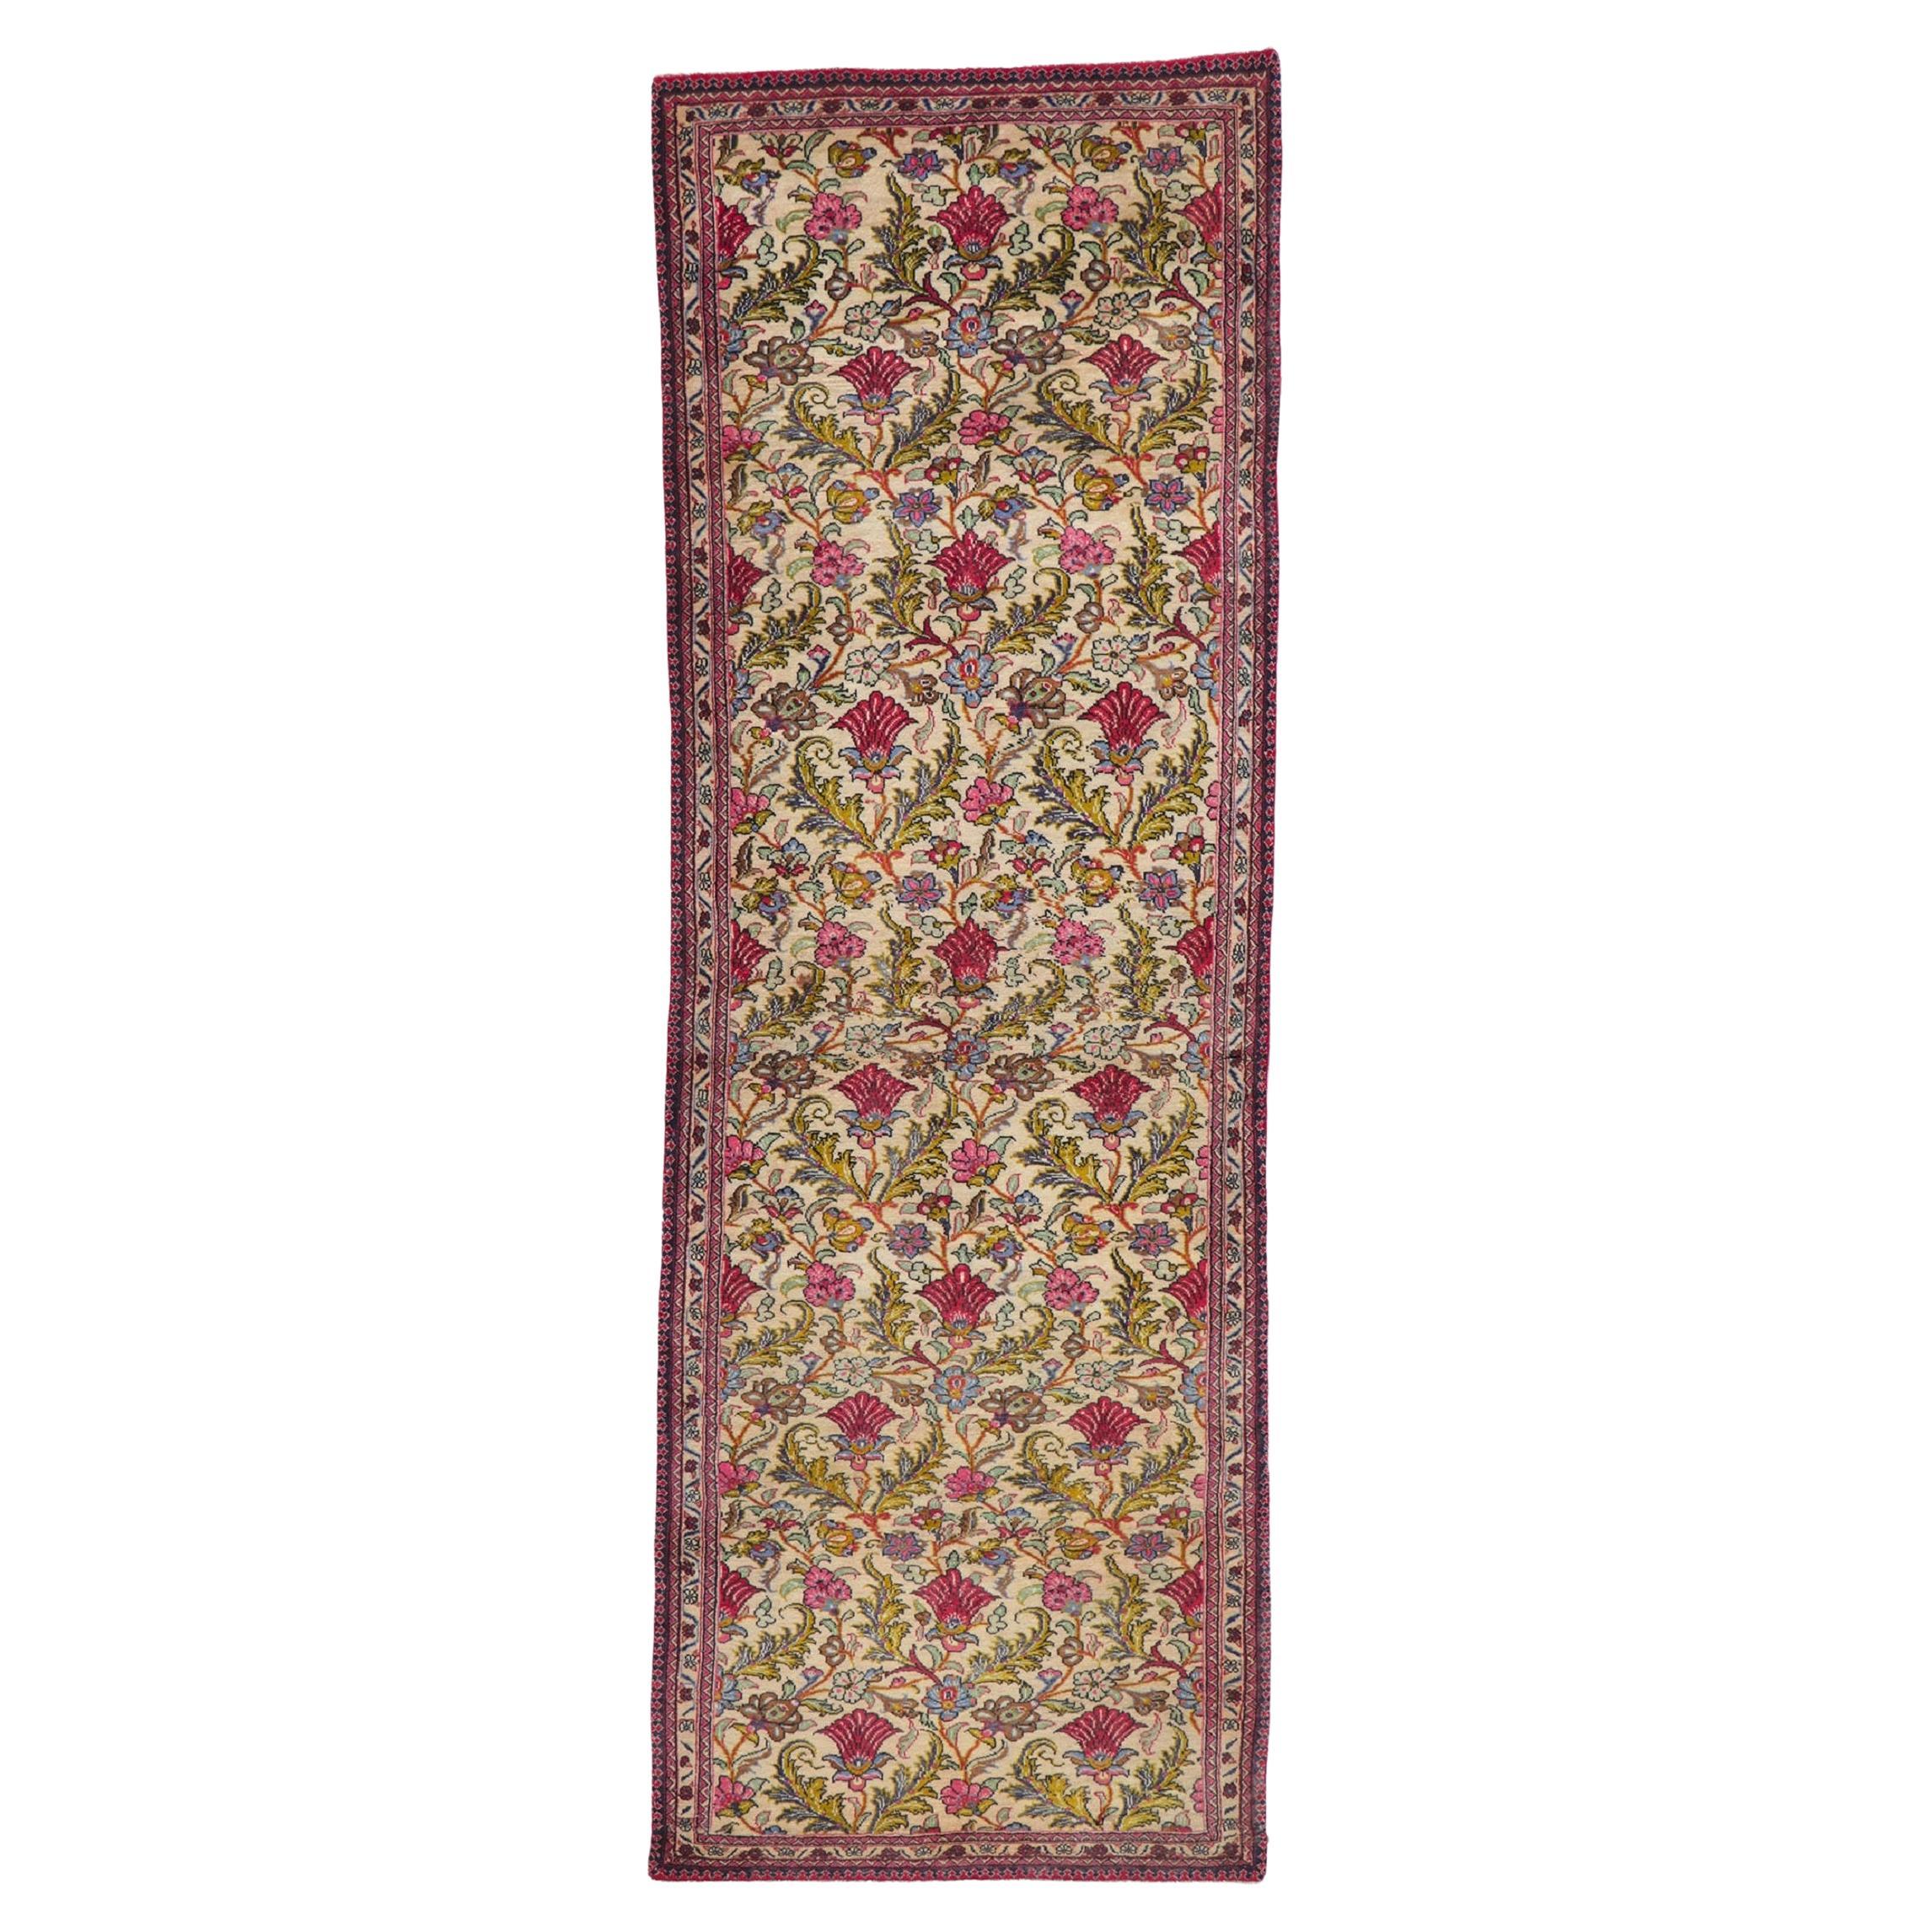 Vintage Persian Qum Runner with Arts & Crafts Style